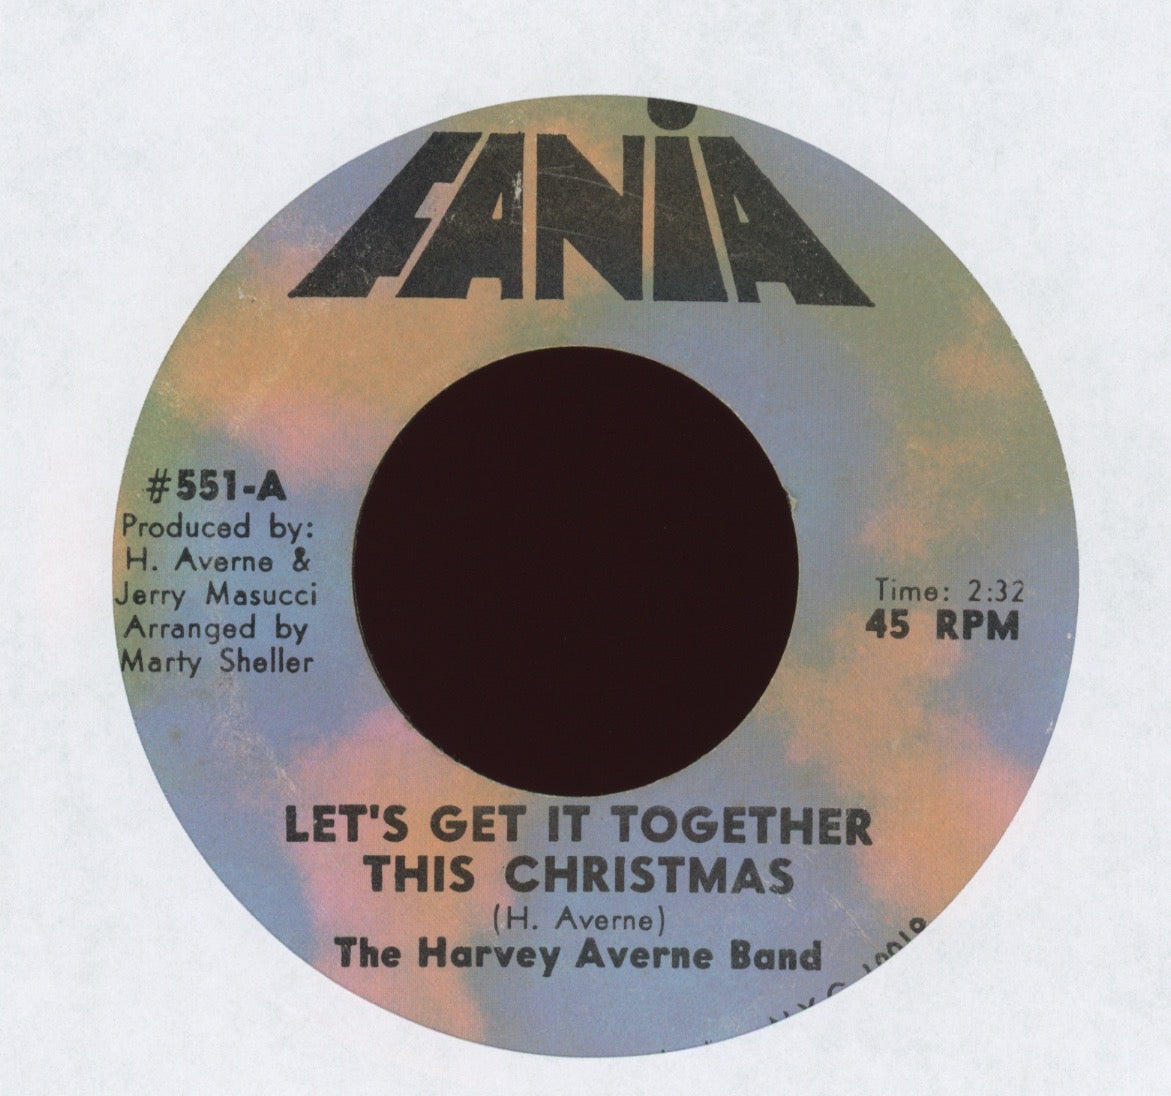 The Harvey Averne Band - Let's Get It Together This Christmas on Fania Latin Funk 45